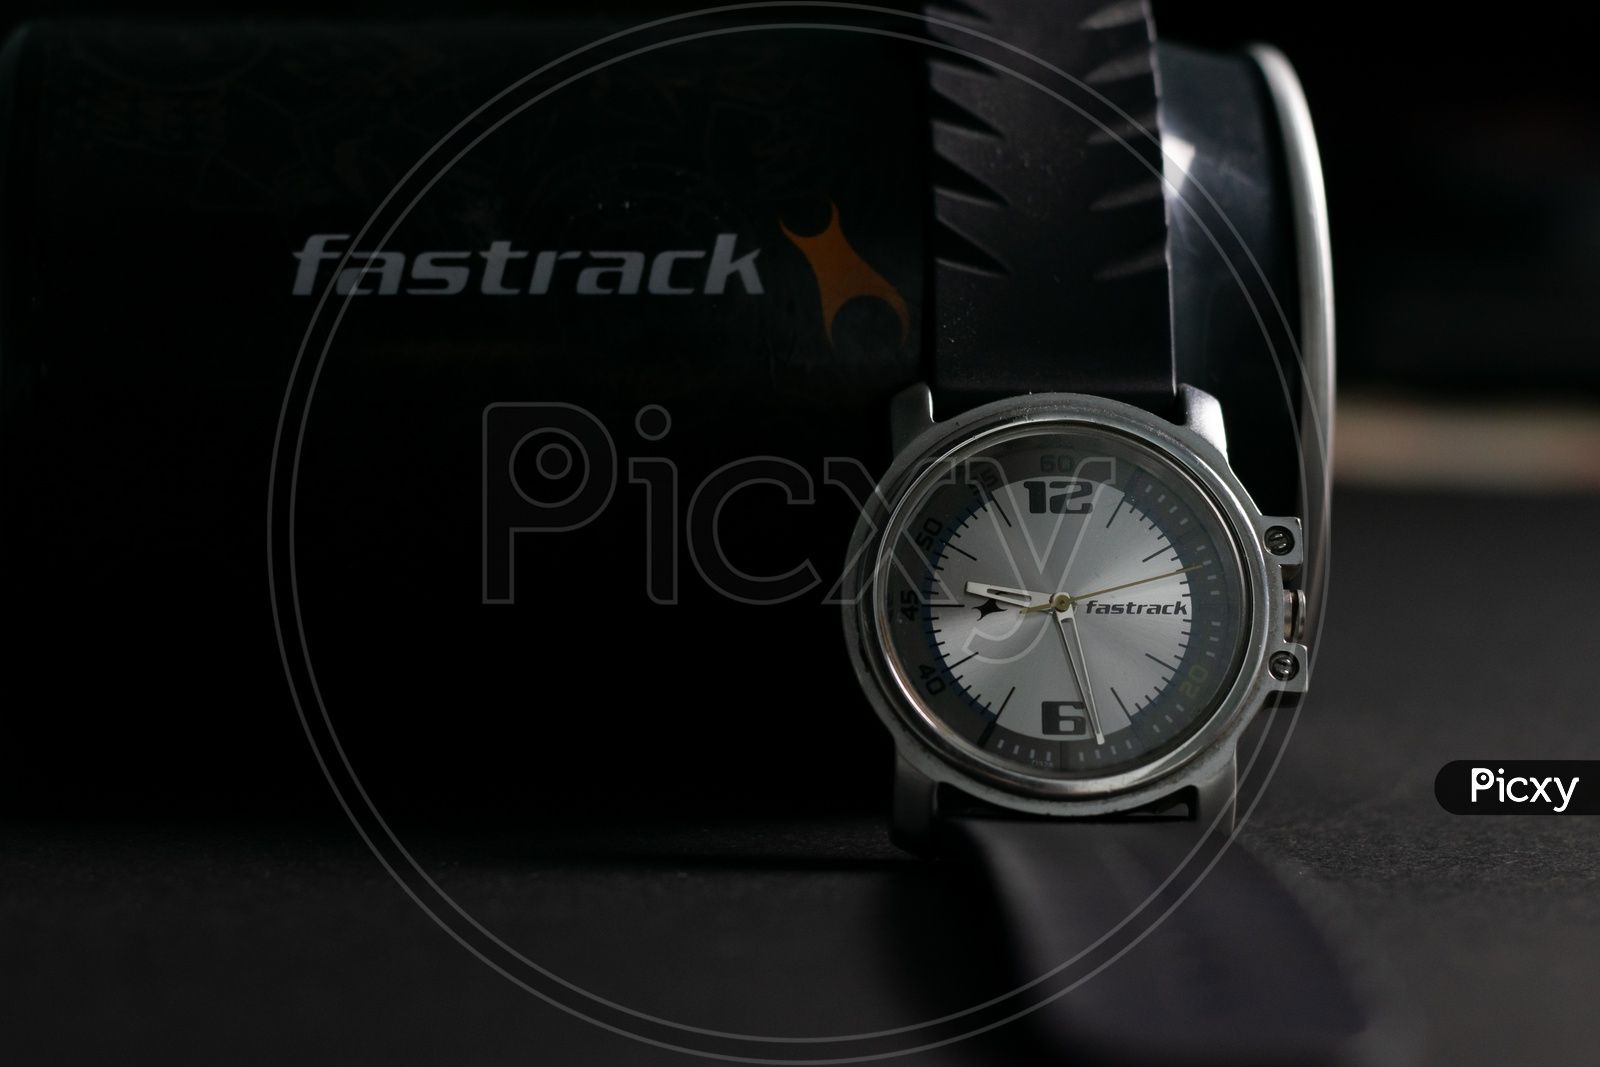 Image Of Fastrack Watch With Watch Packaging Case NT325980 Picxy